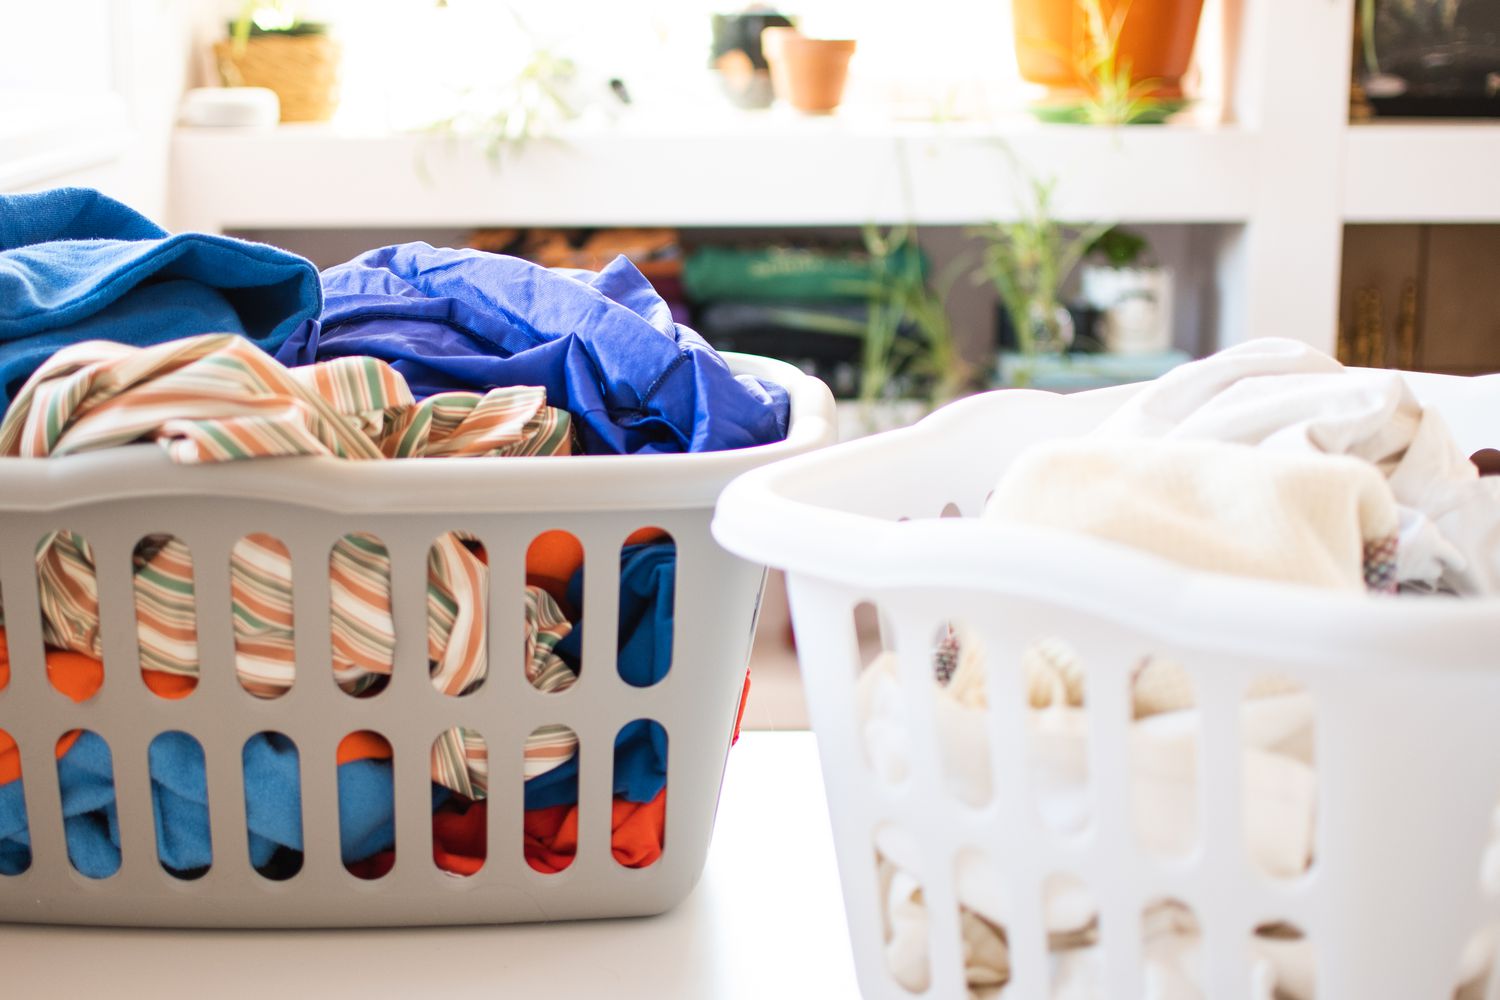 Two laundry baskets with dirty clothes